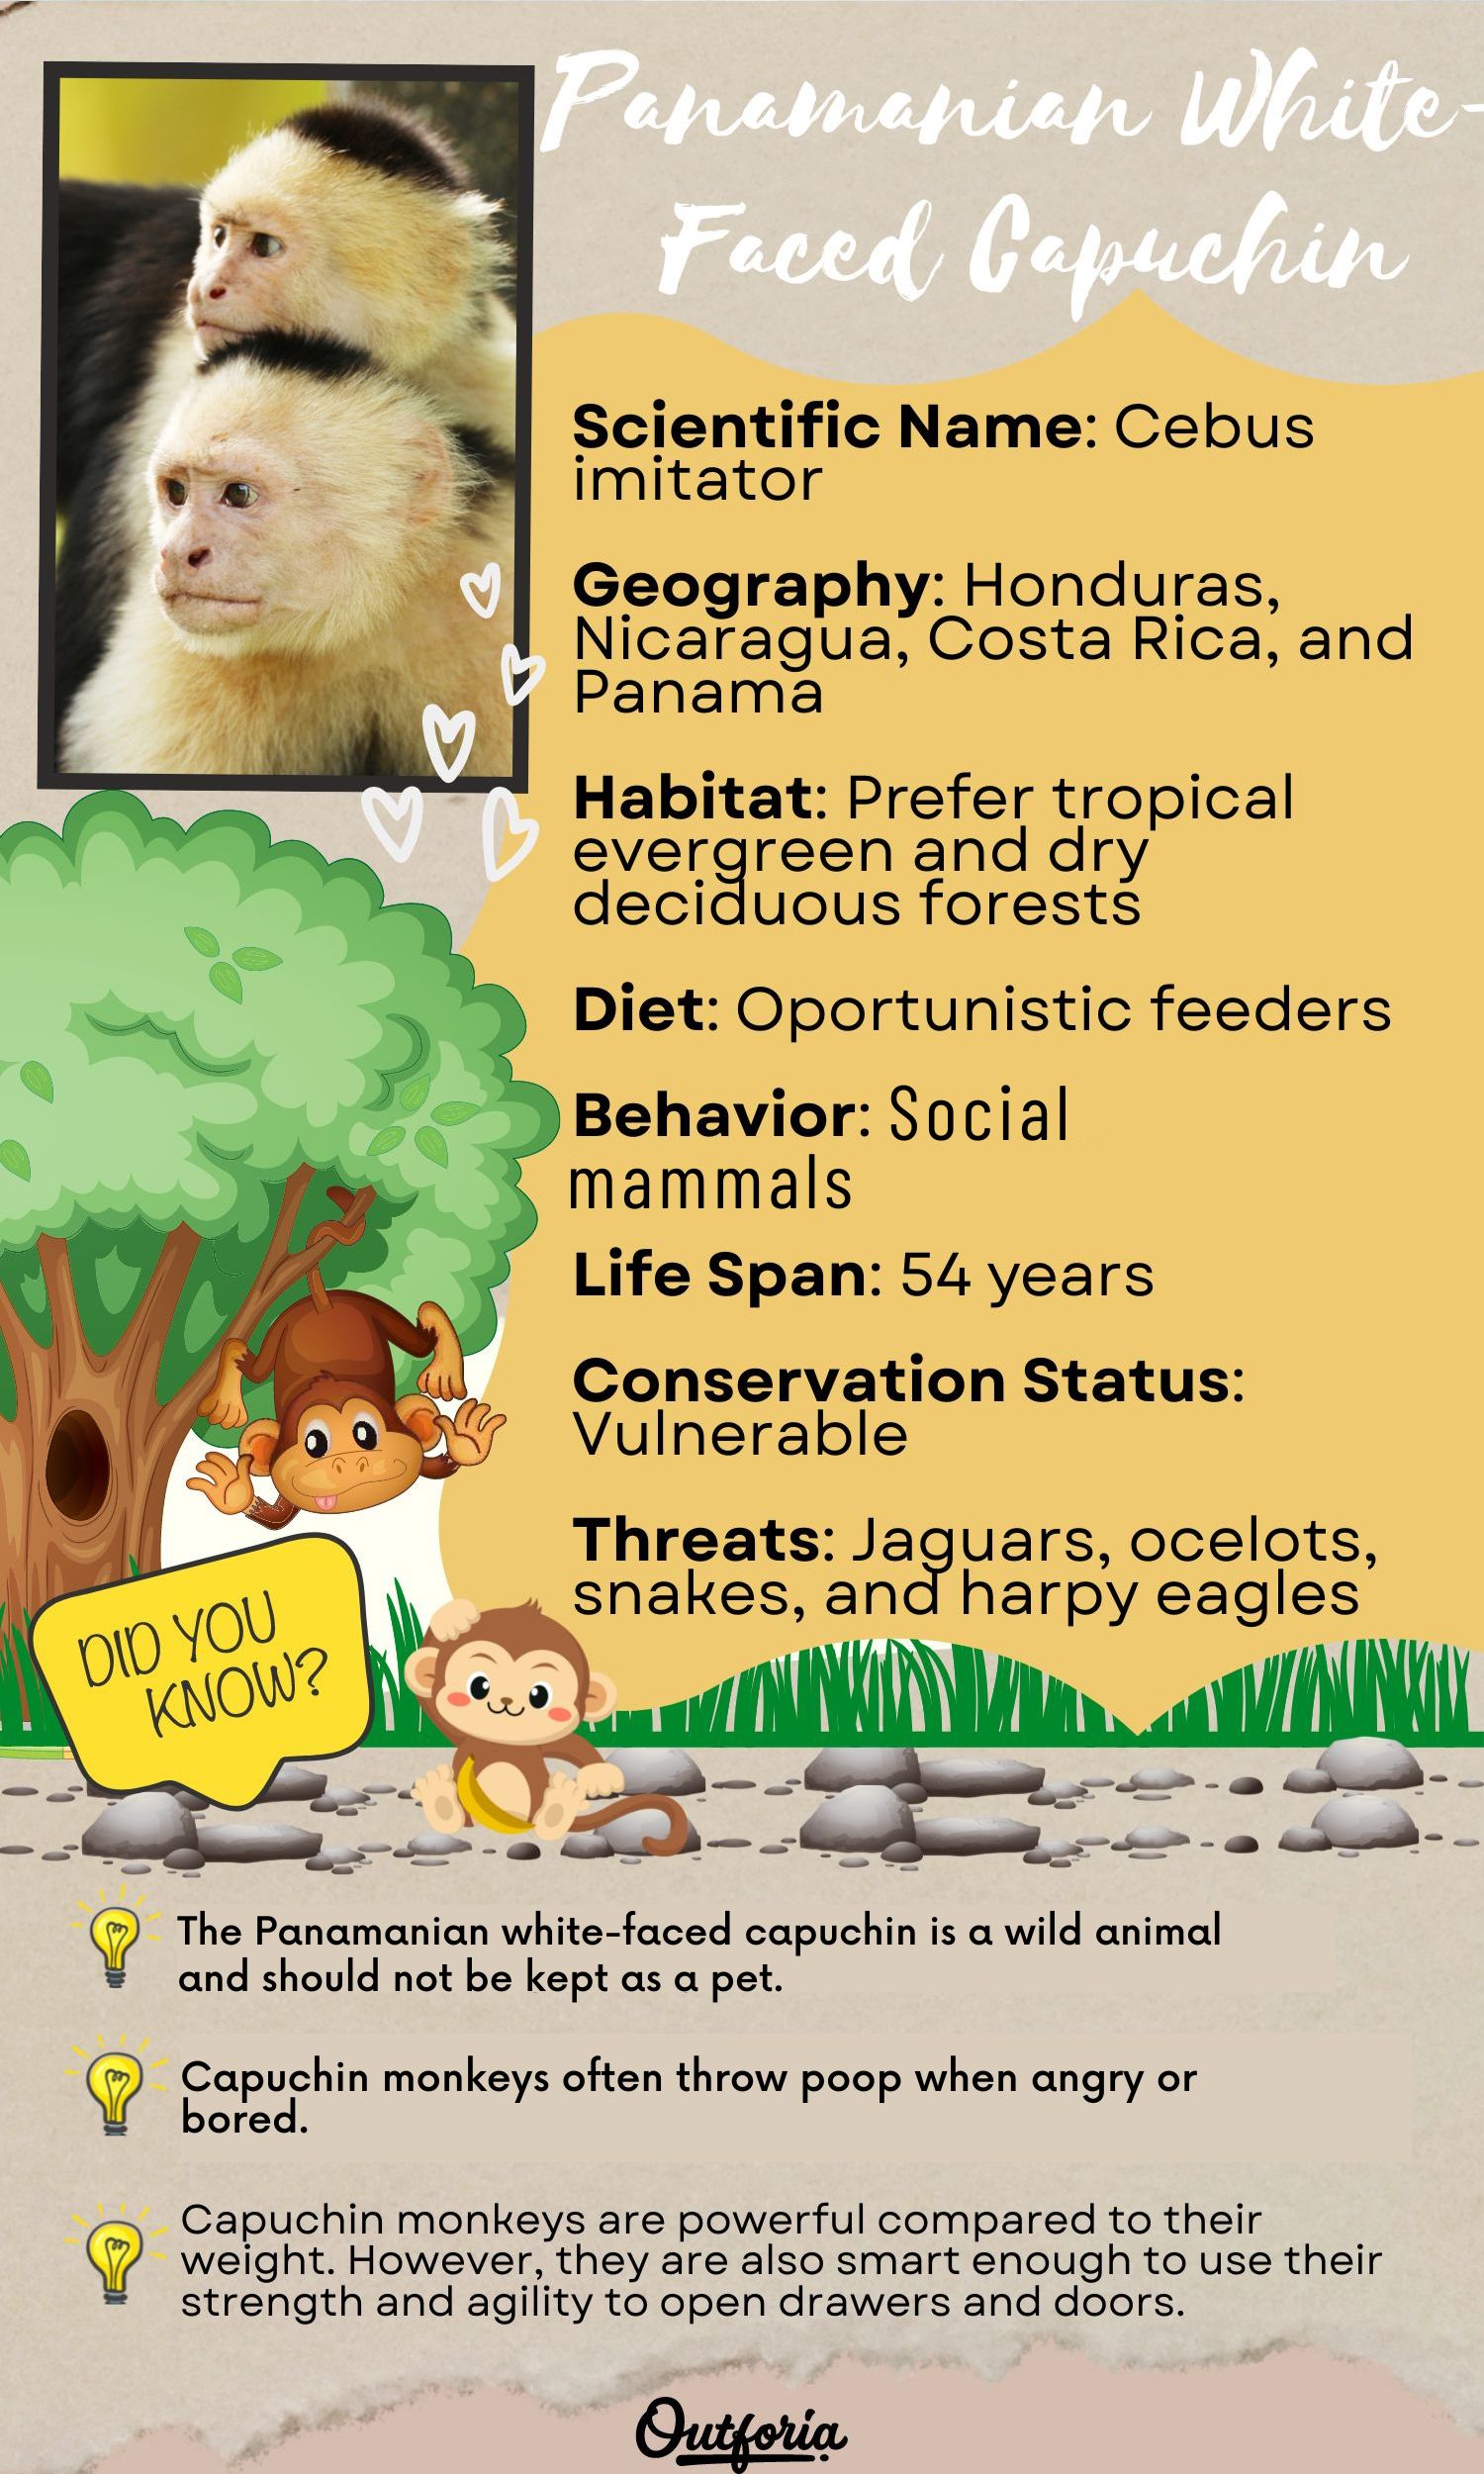 Chart of panamanian white-faced capuchin complete with facts, pictures, and more